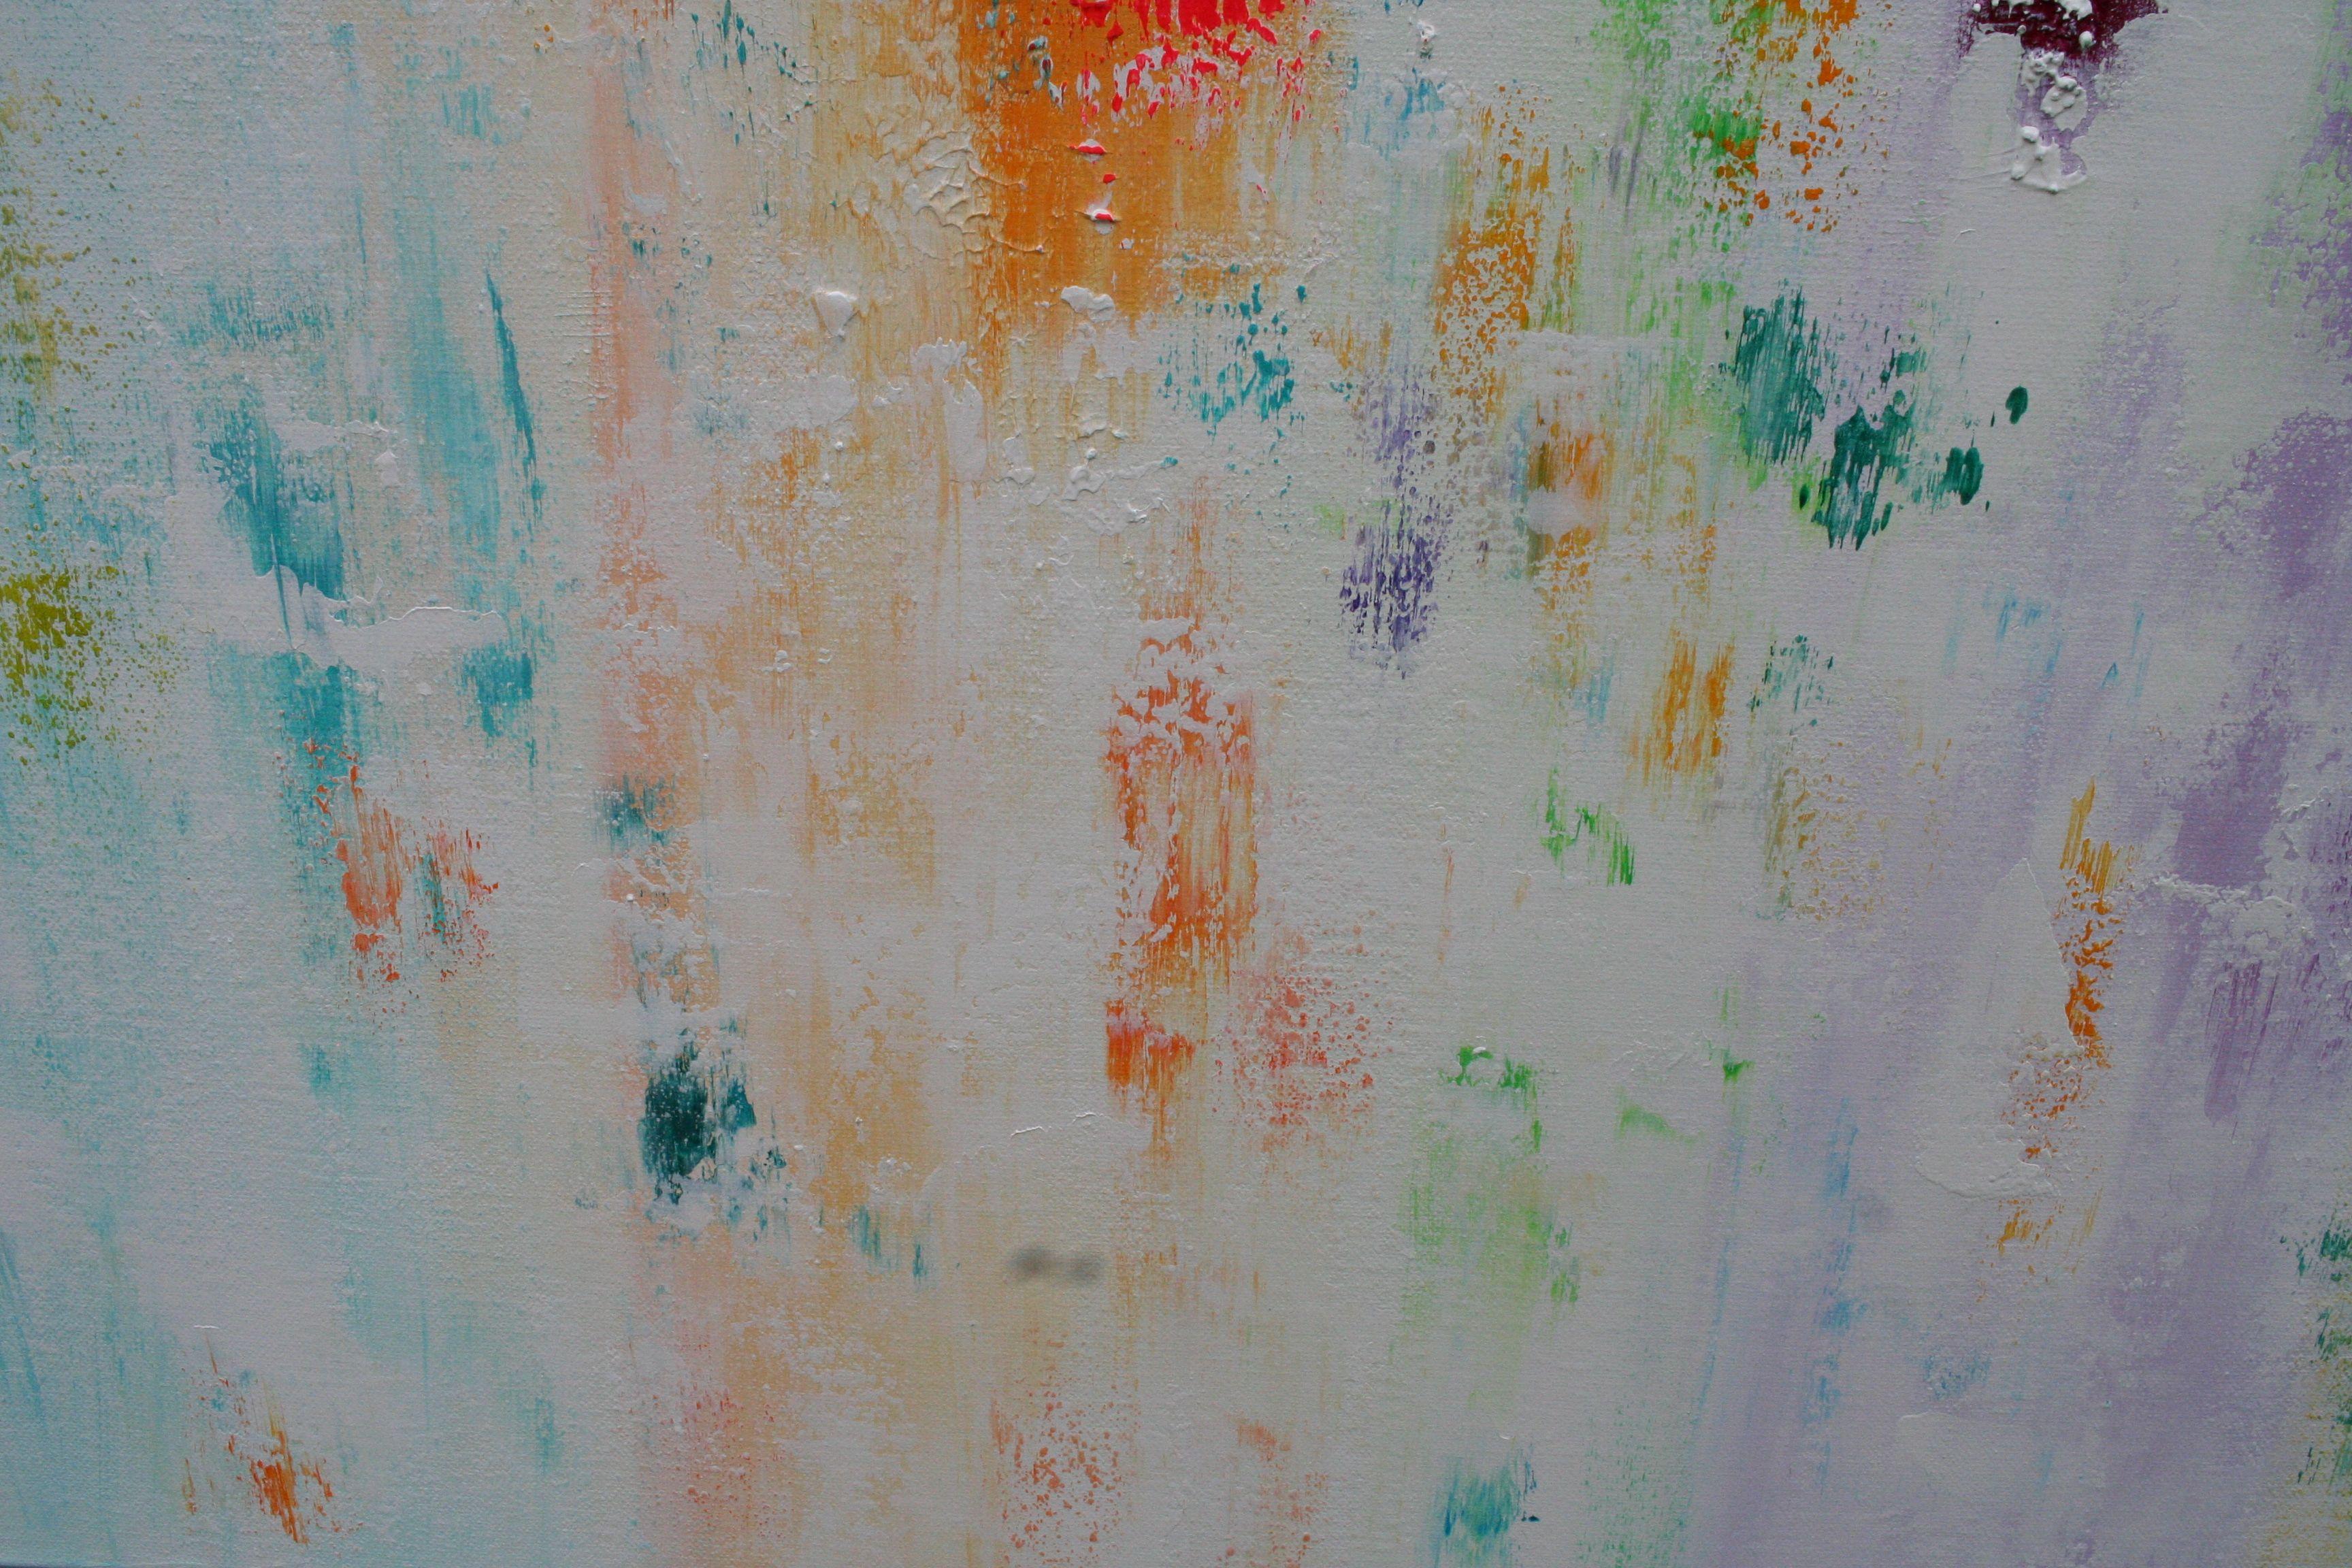 Elevate - Extra Large Colourful Textured Abstract, Painting, Acrylic on Canvas - Gray Abstract Painting by Susan Wooler